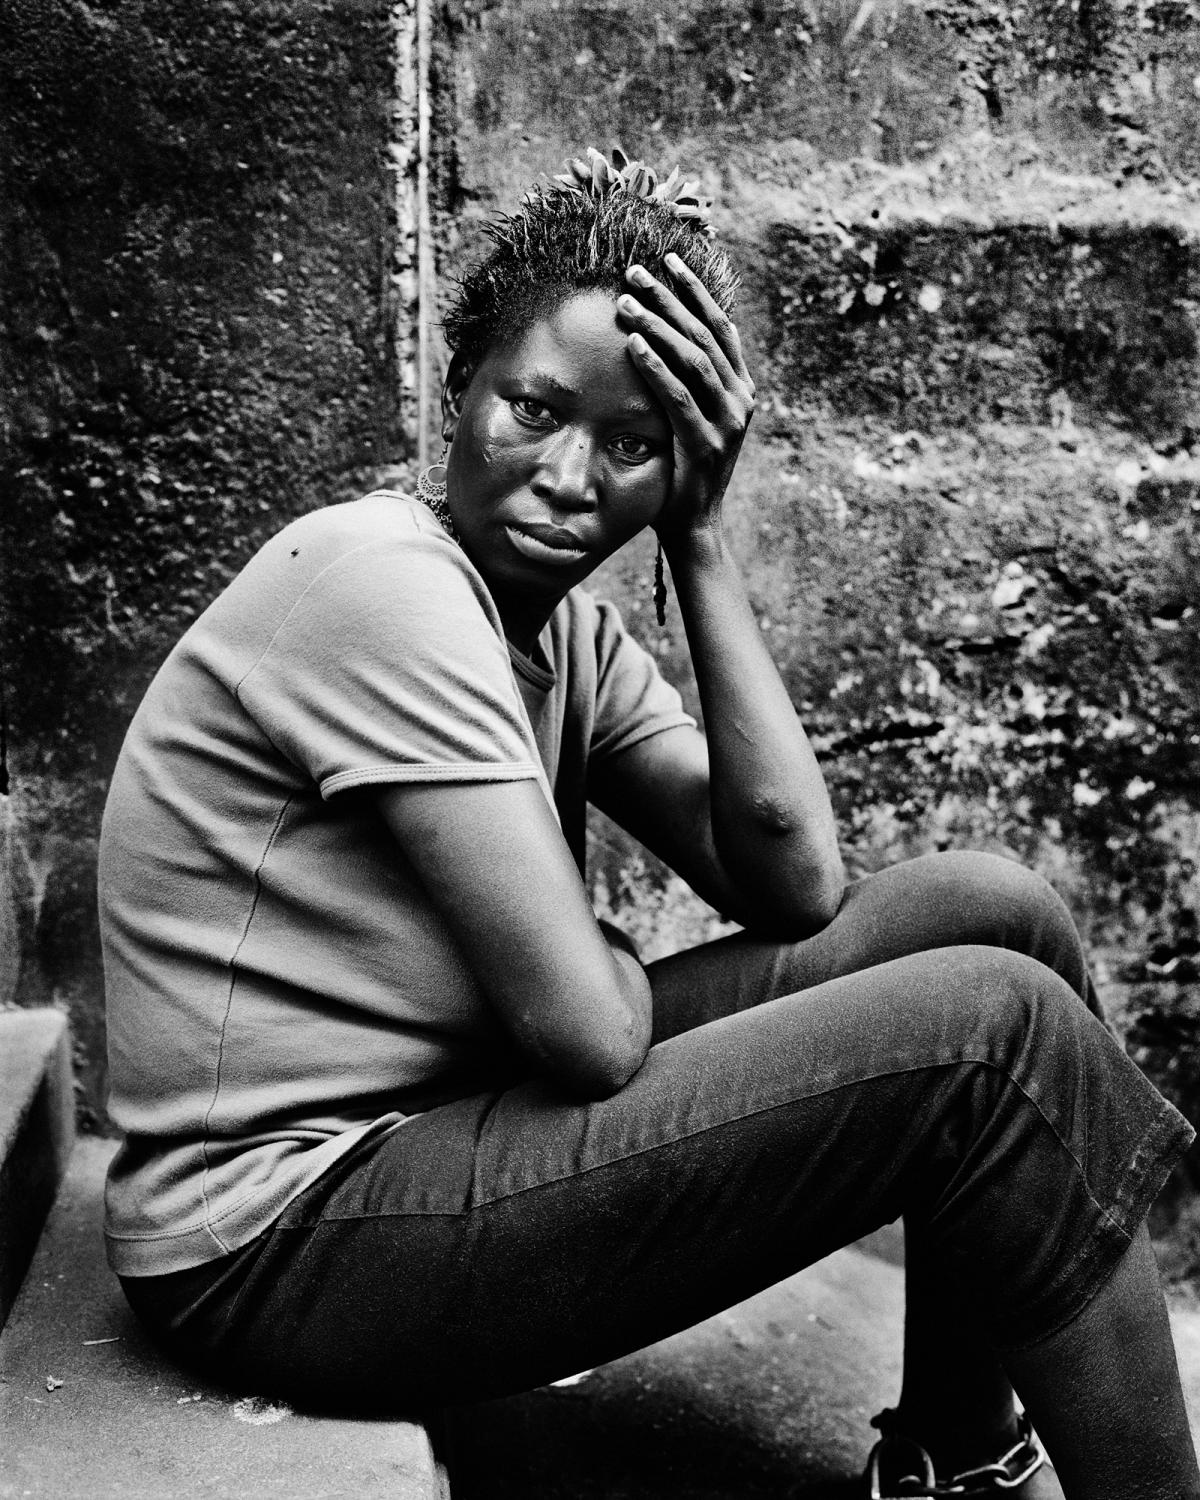 City of rest - SIERRA LEONE Freetown. August 2007. Portarit of a chained...